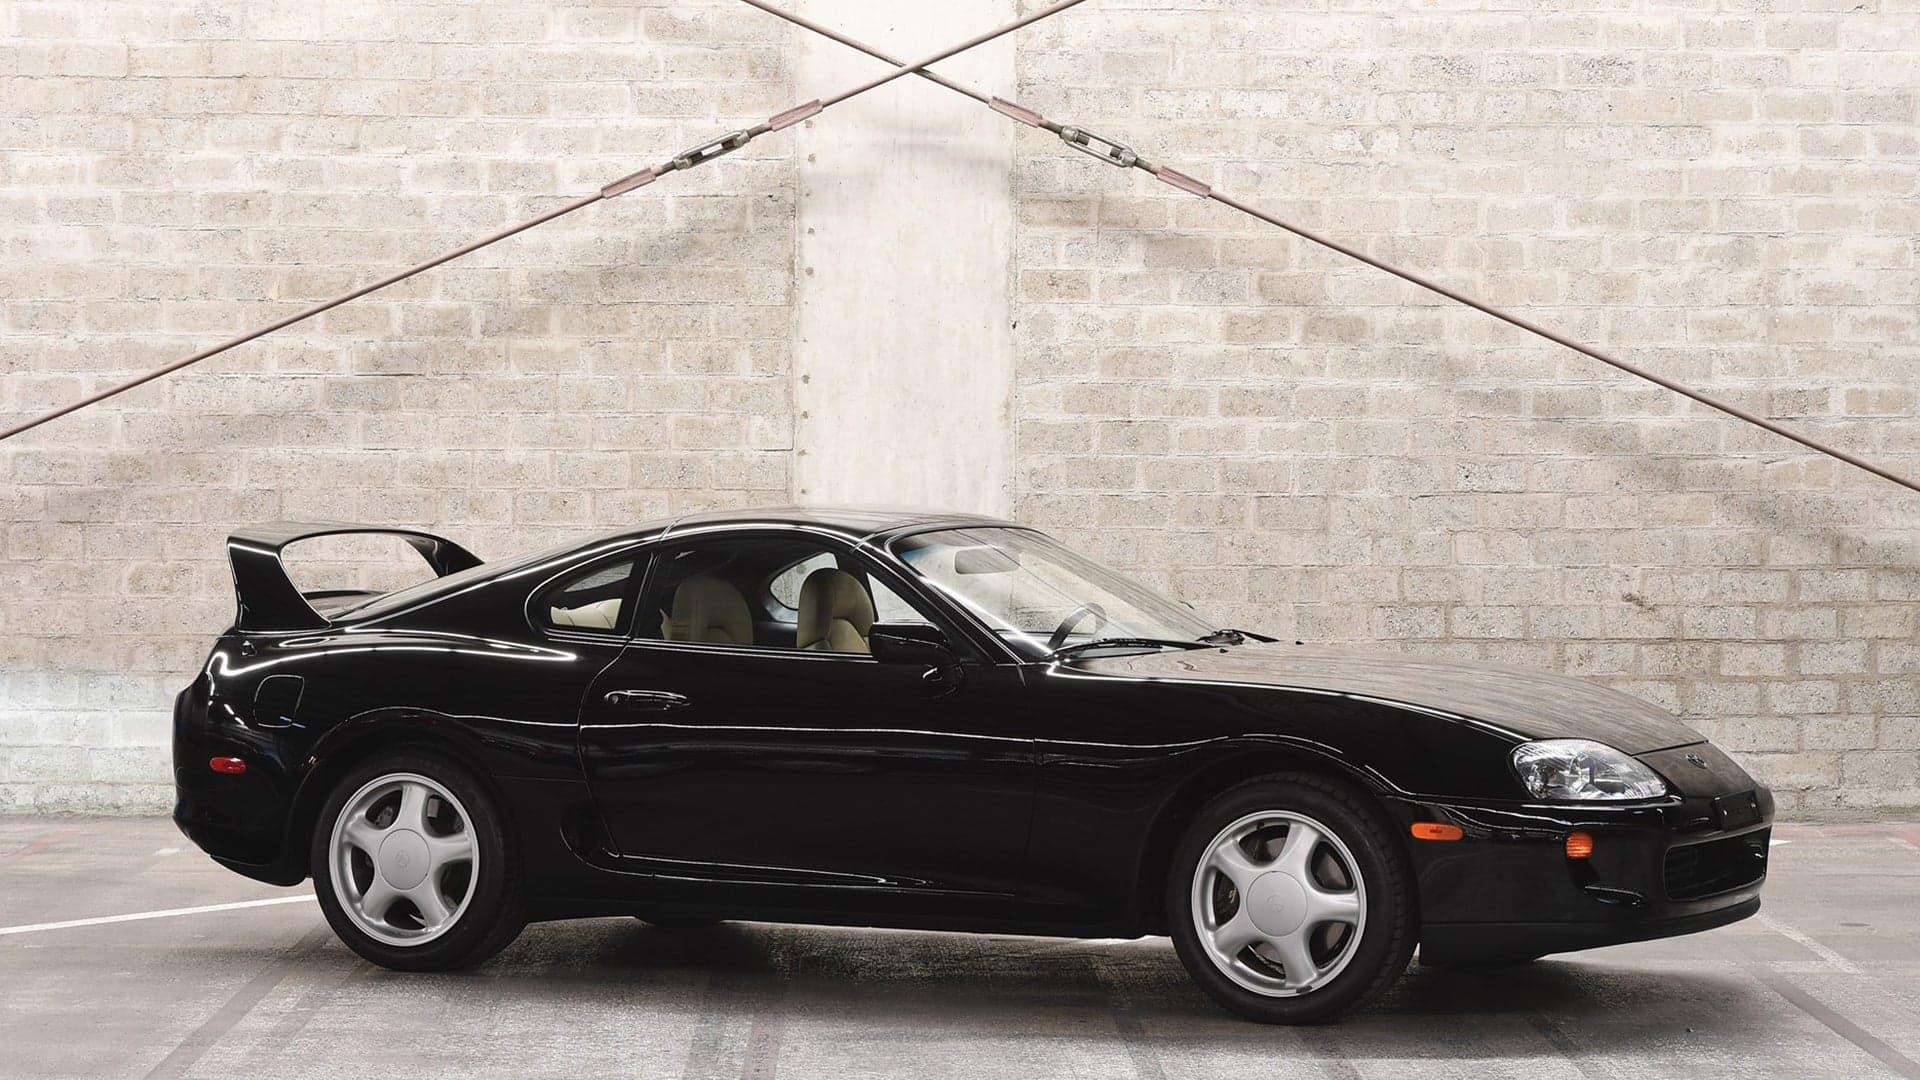 A 1994 Toyota Supra With 11,200 Miles Just Sold for a Monstrous $173,600